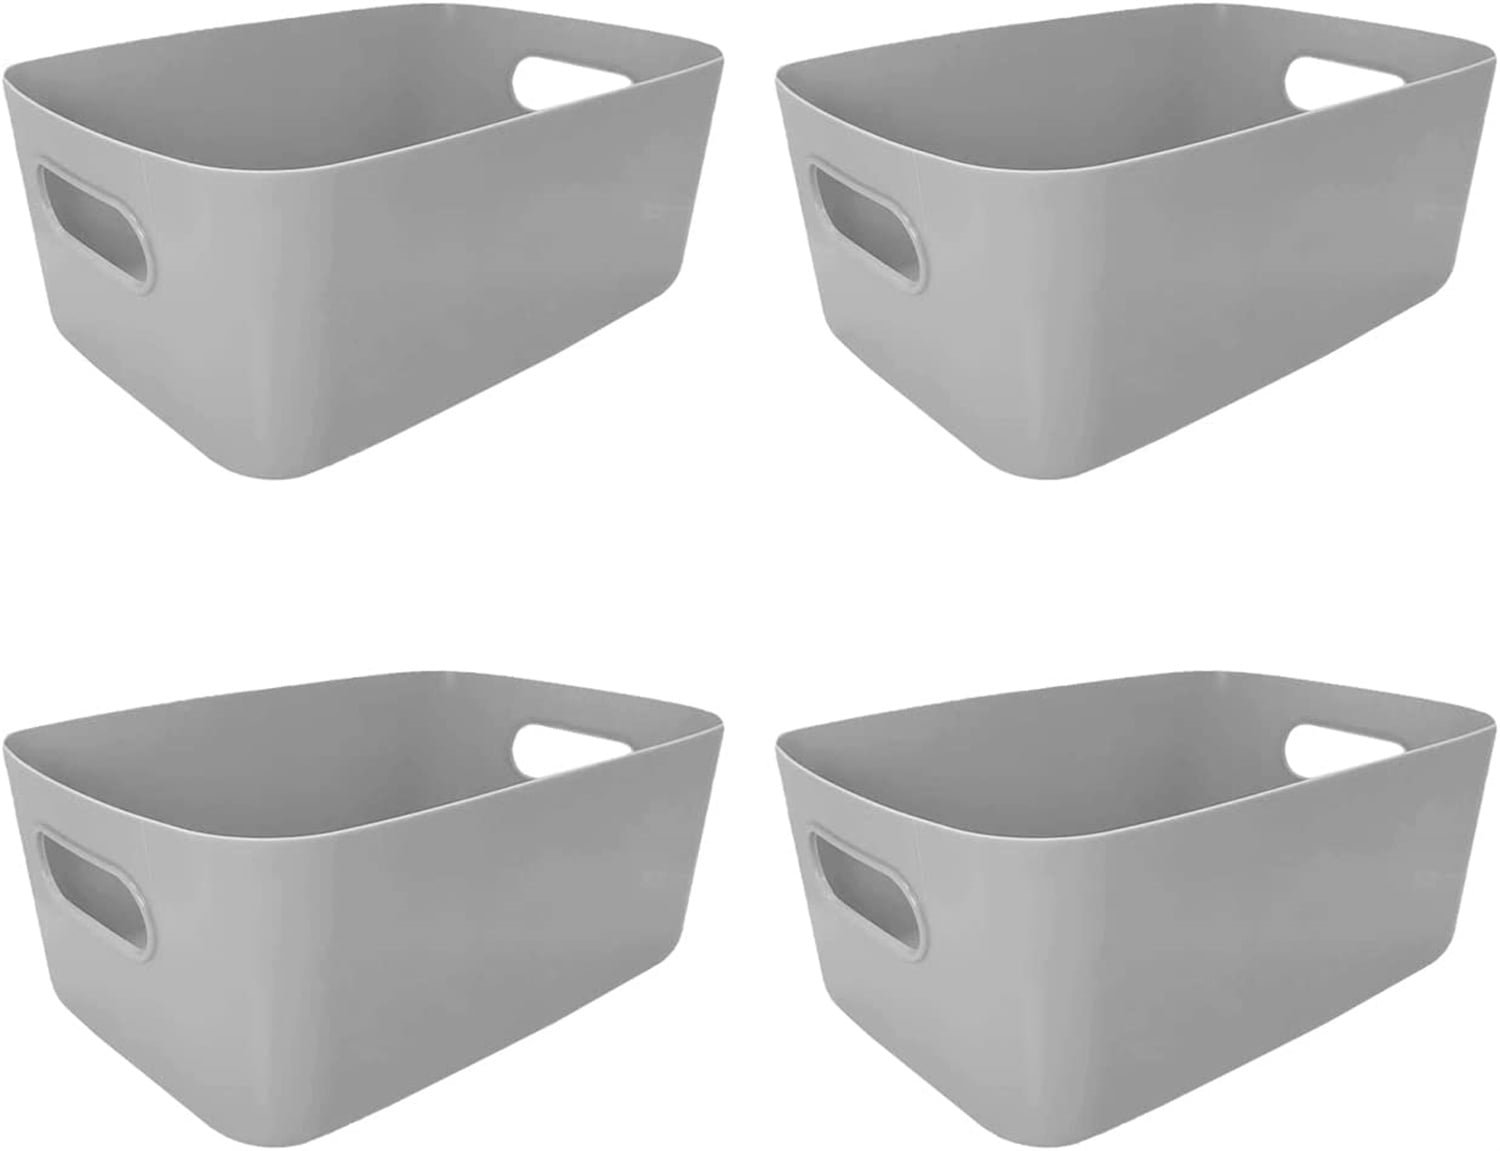 Casewin Plastic Storage Baskets 4 Pack, Small Pantry Baskets for